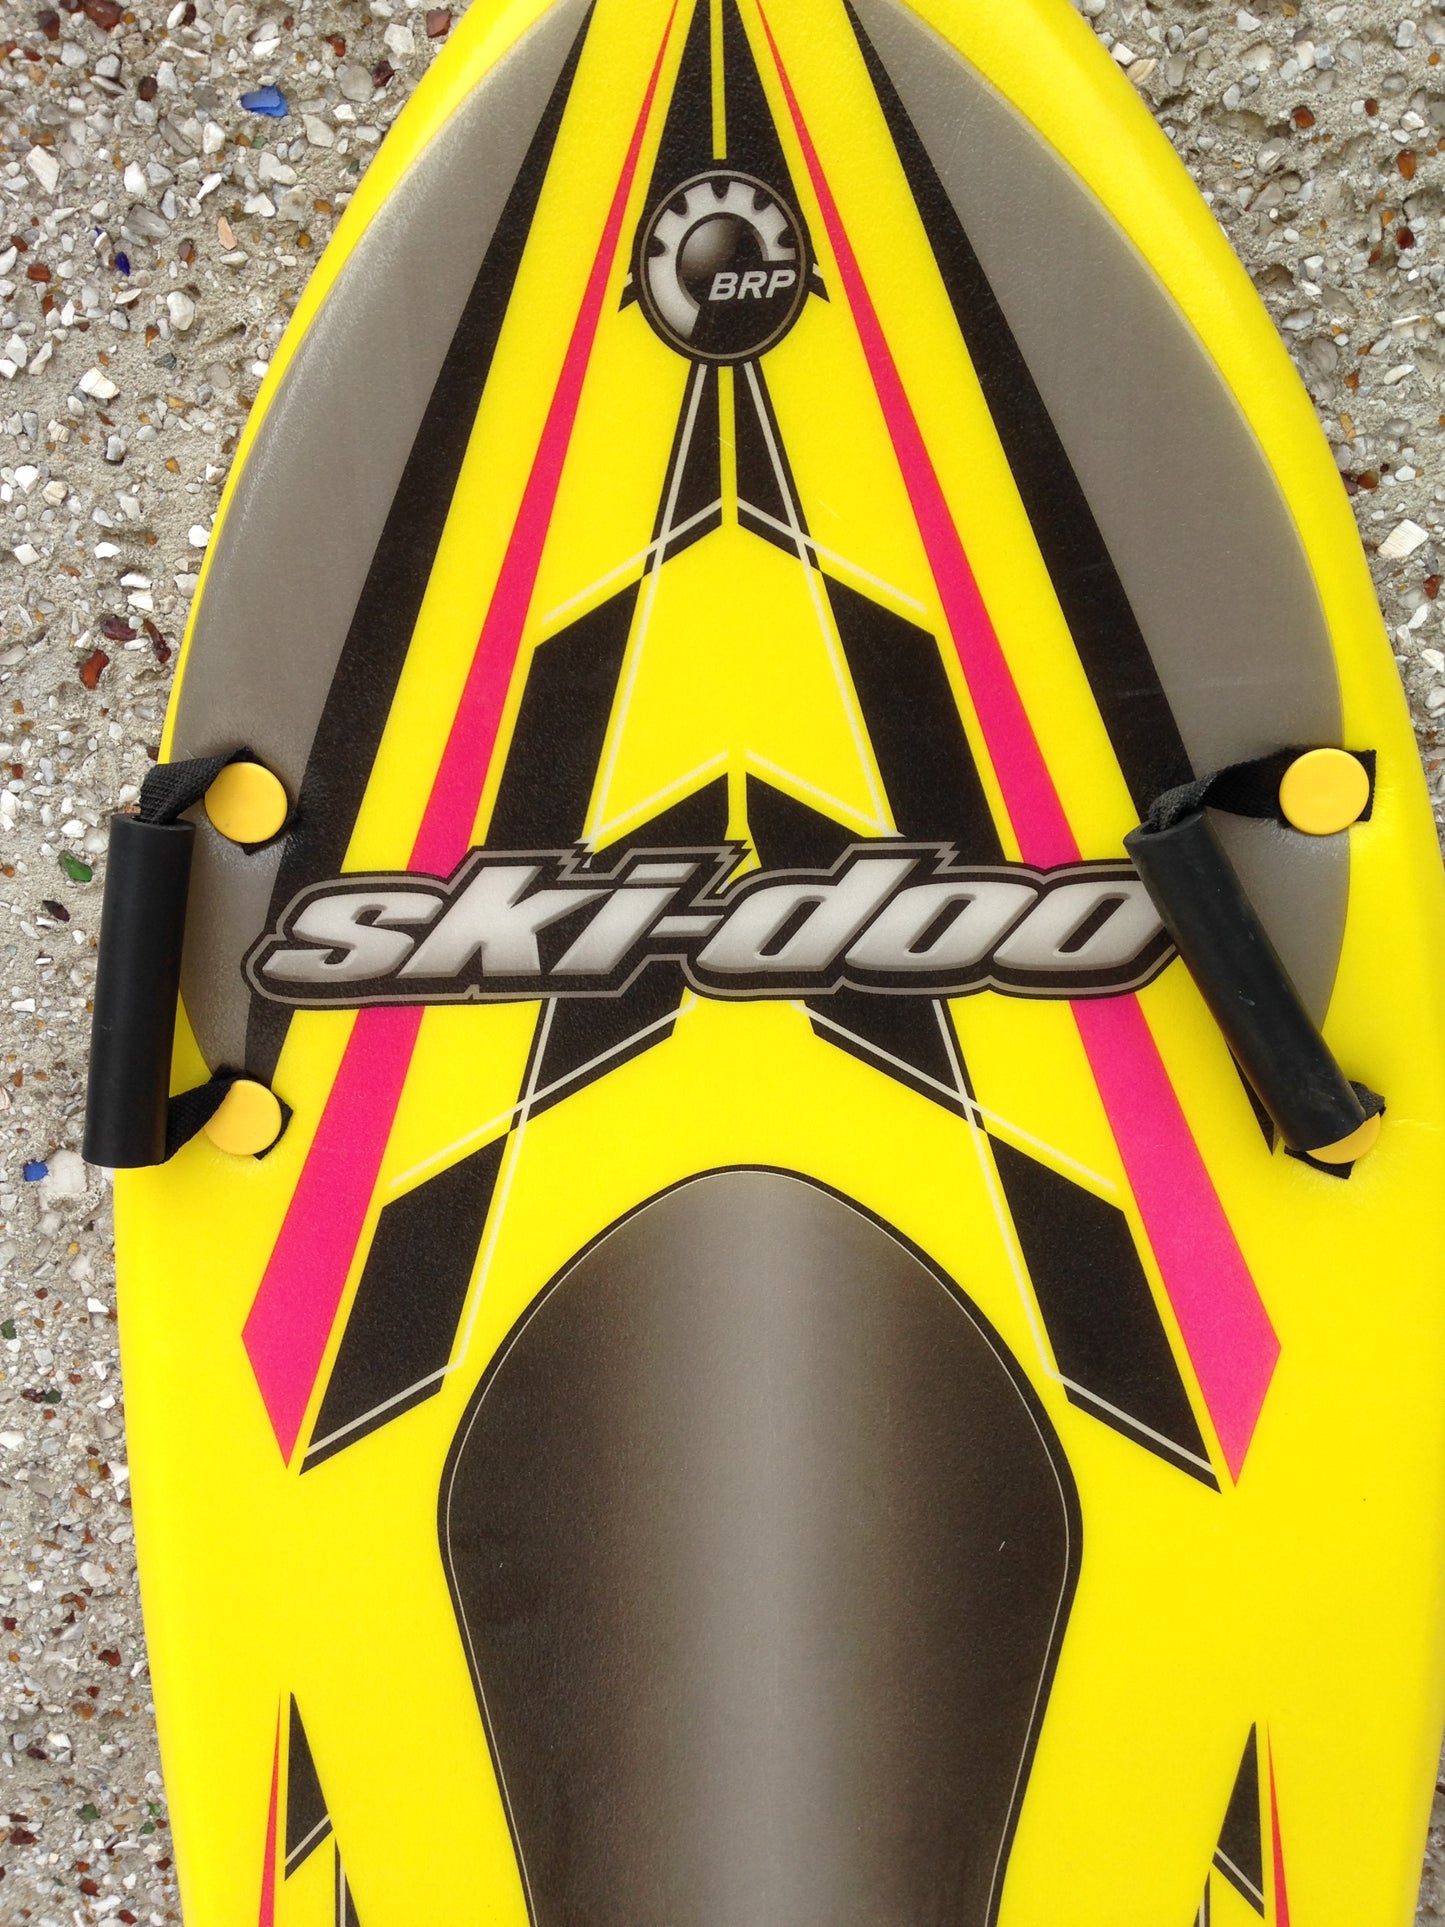 Snow Sled Ski Doo Foam Racing Sled Child Size 4-12 Excellent As New Yellow Multi